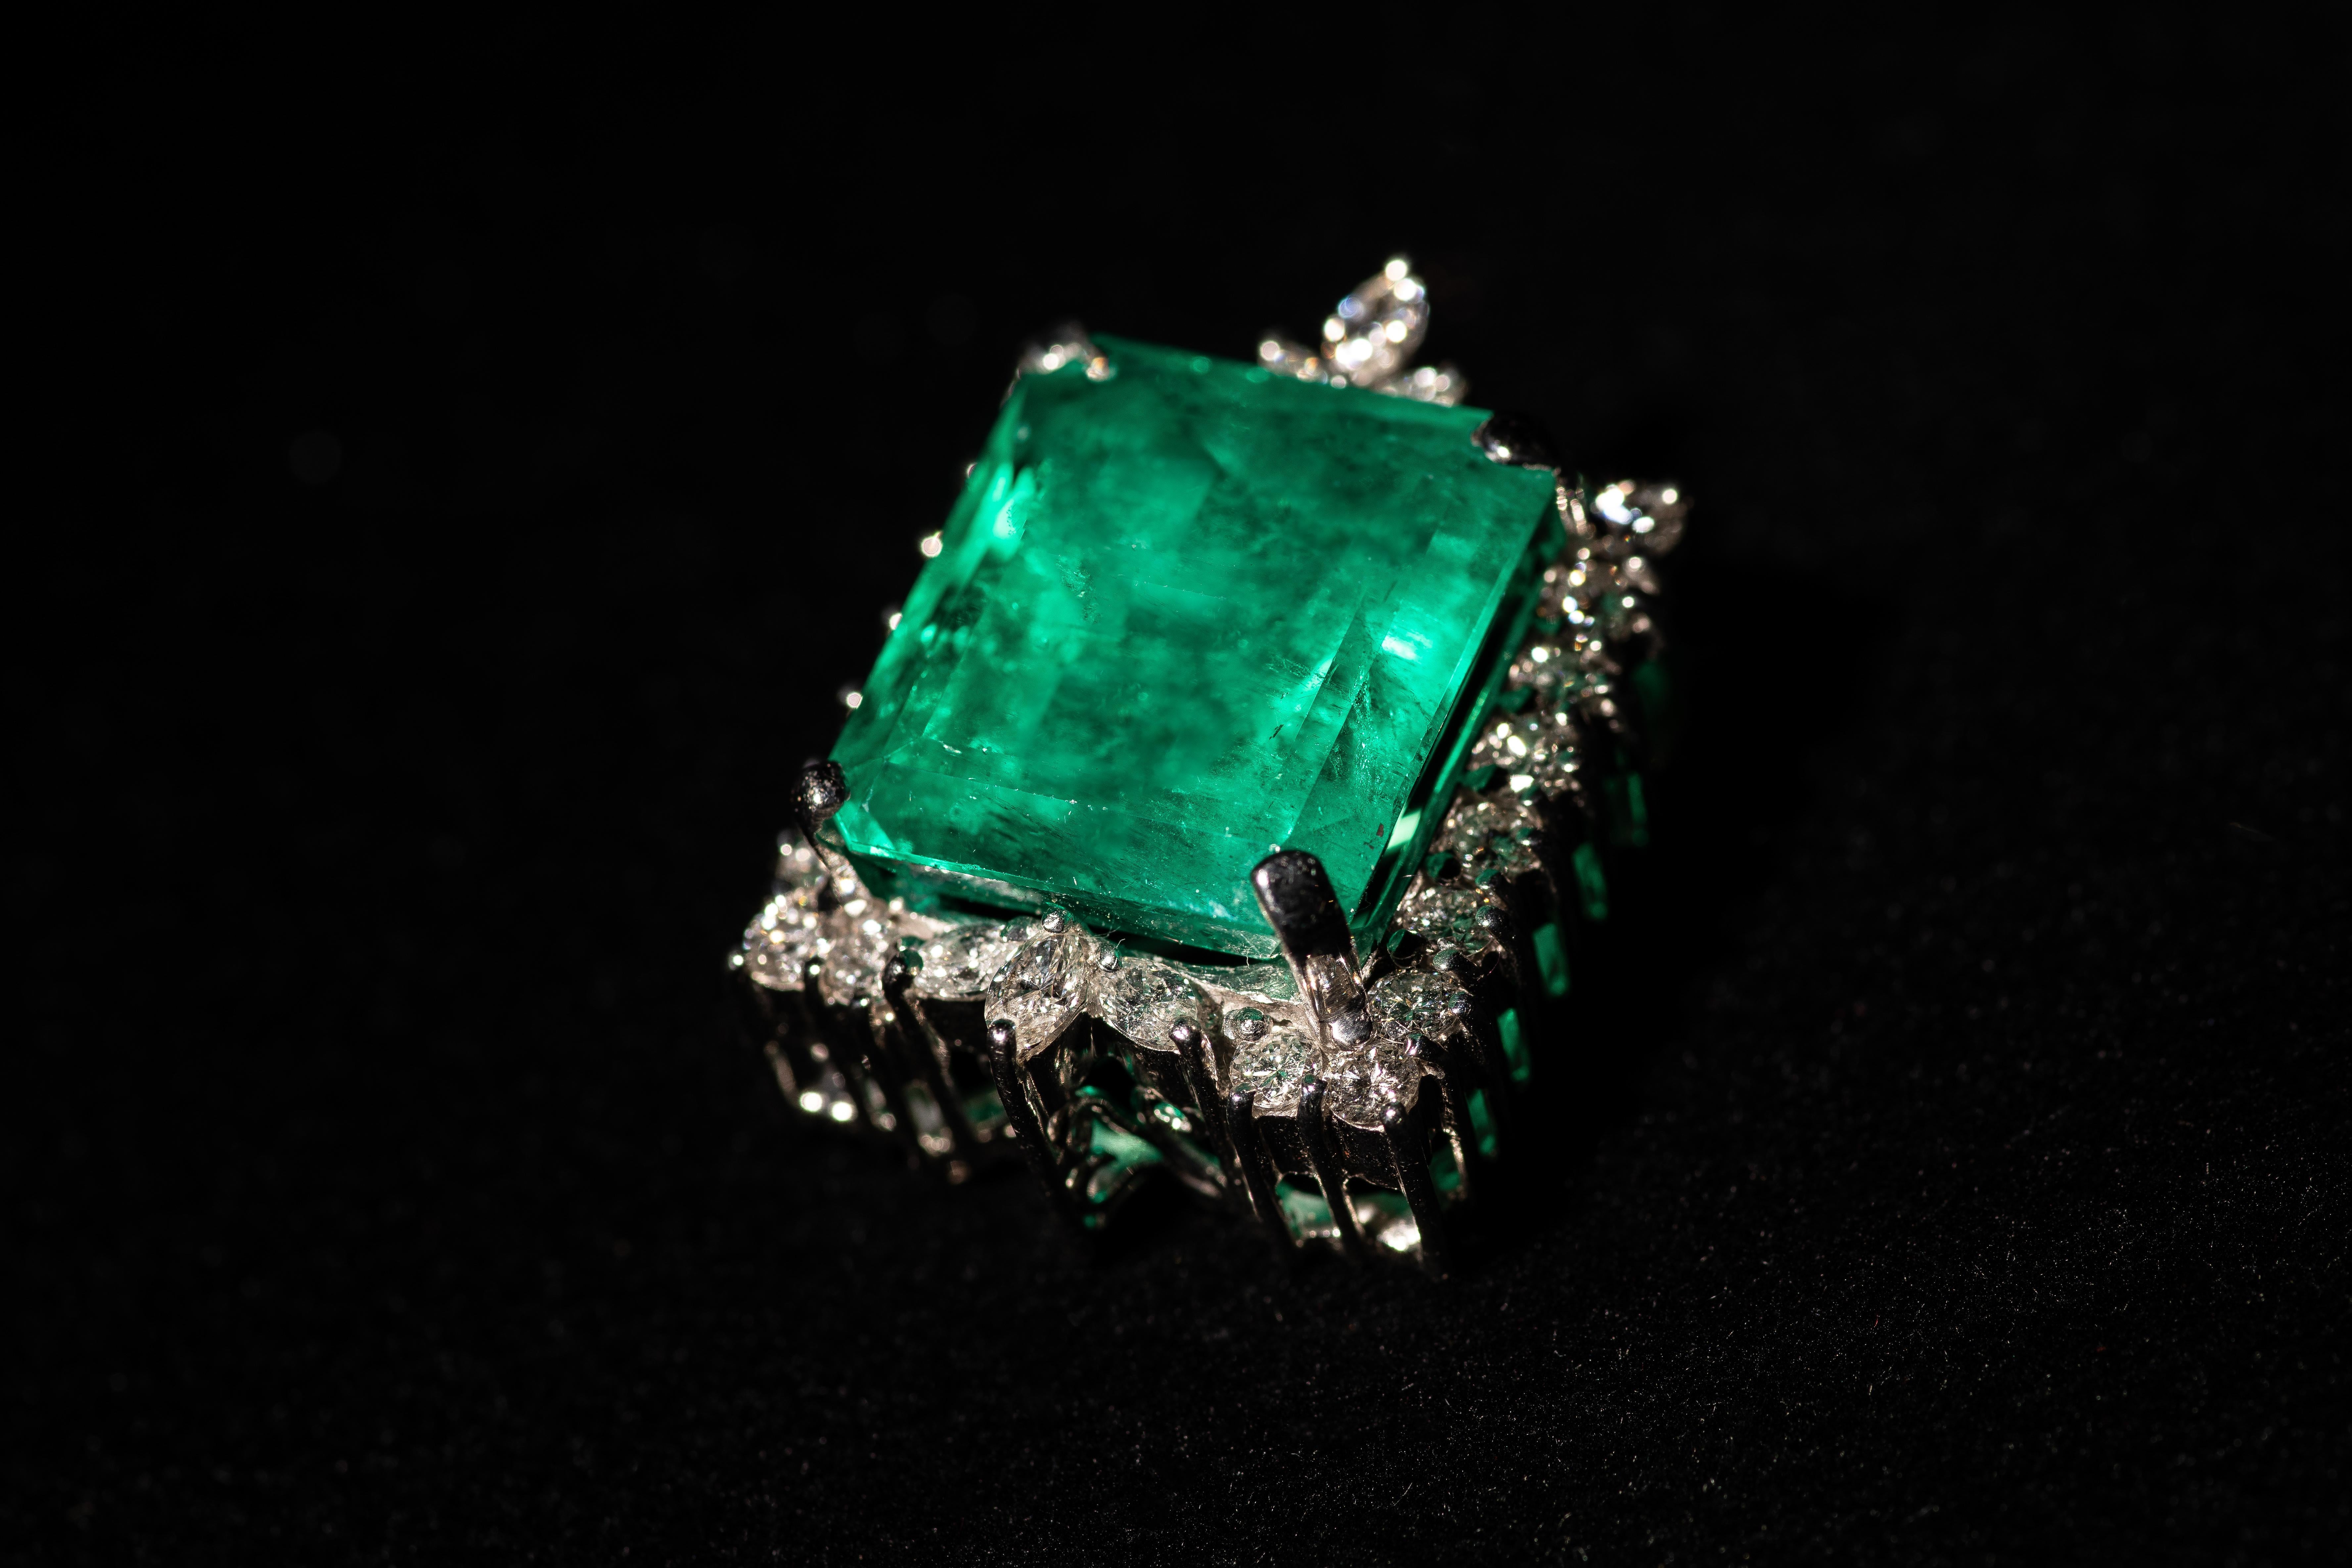 A stunning emerald brooch pin, featuring a magnificent 34.30 Colombian emerald cut emerald surrounded by diamonds, all set in 18k white gold.

The large emerald is AGL certified as natural, green in color, with minor clarity enhancement. A copy of